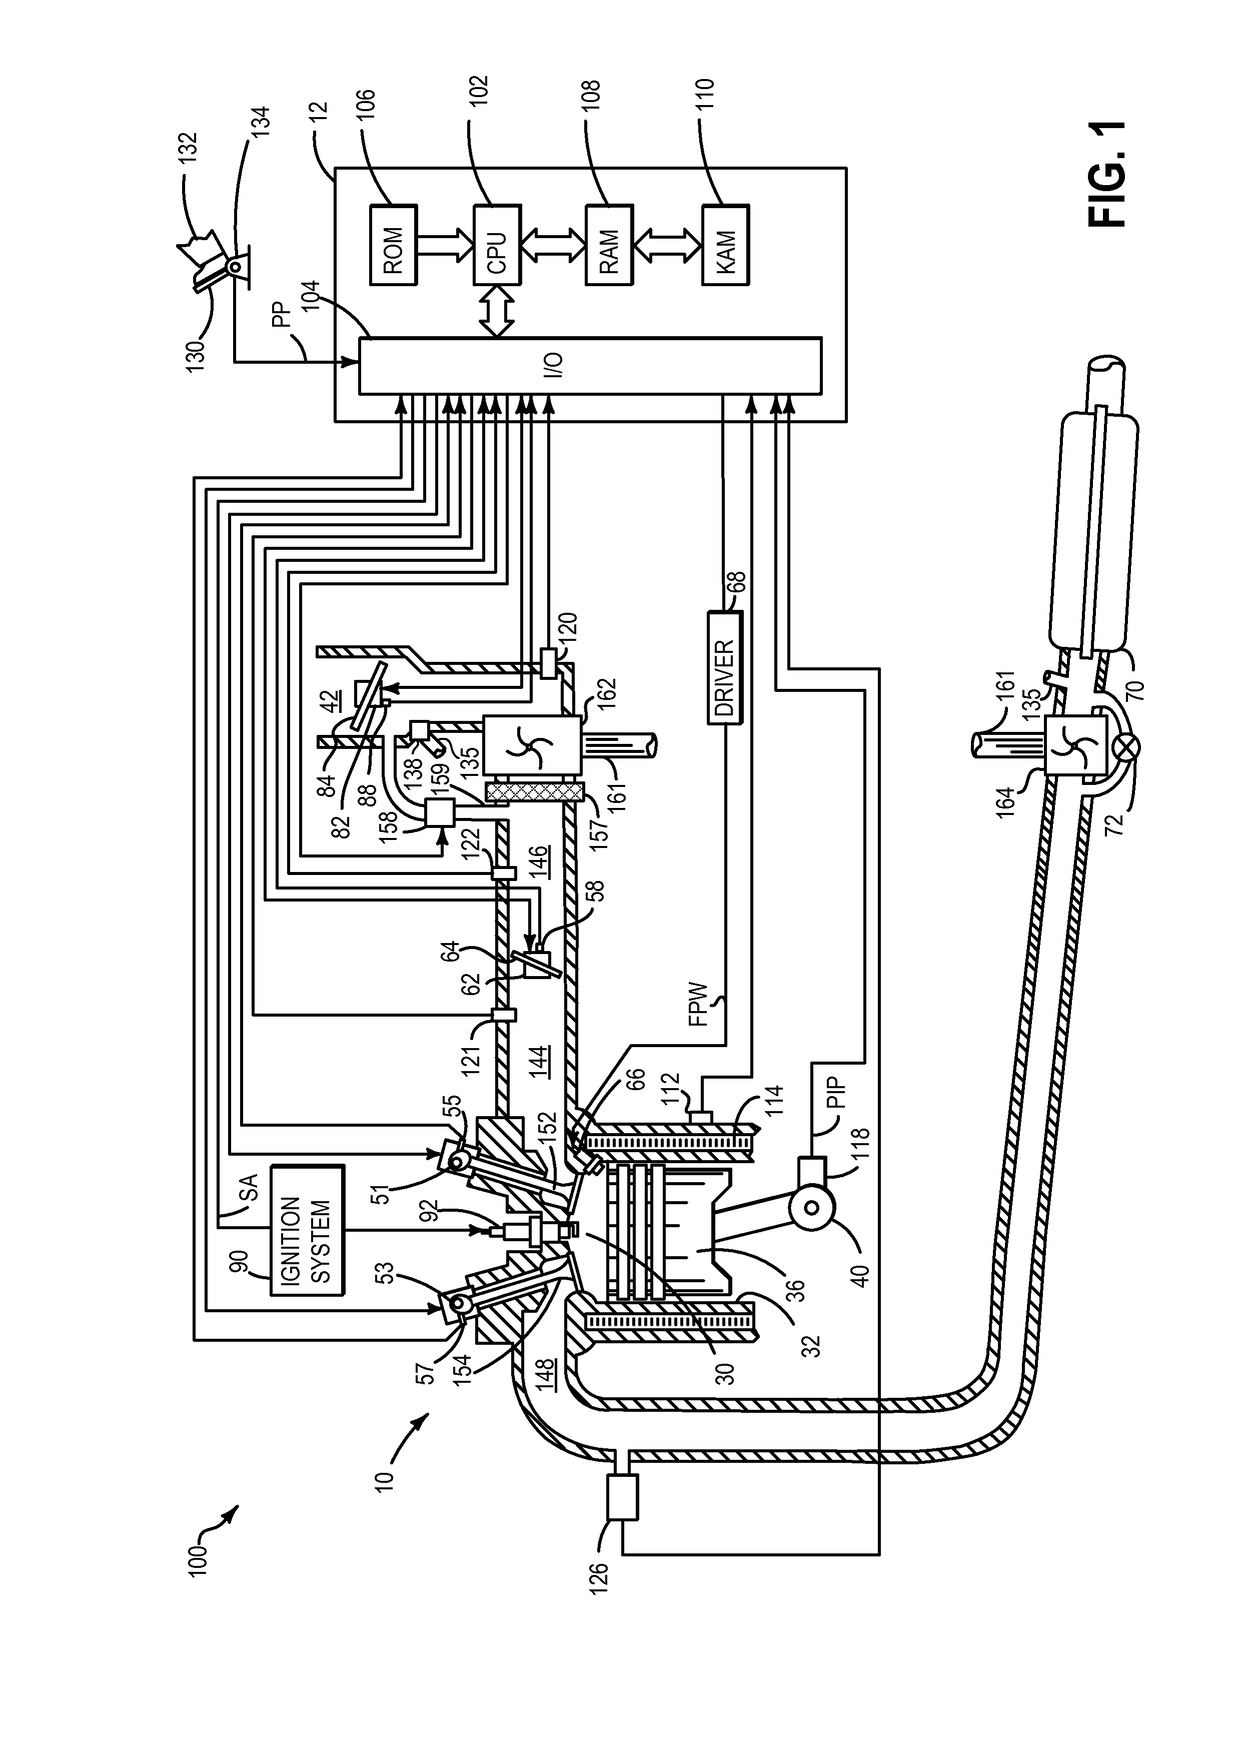 Dual coil ignition system